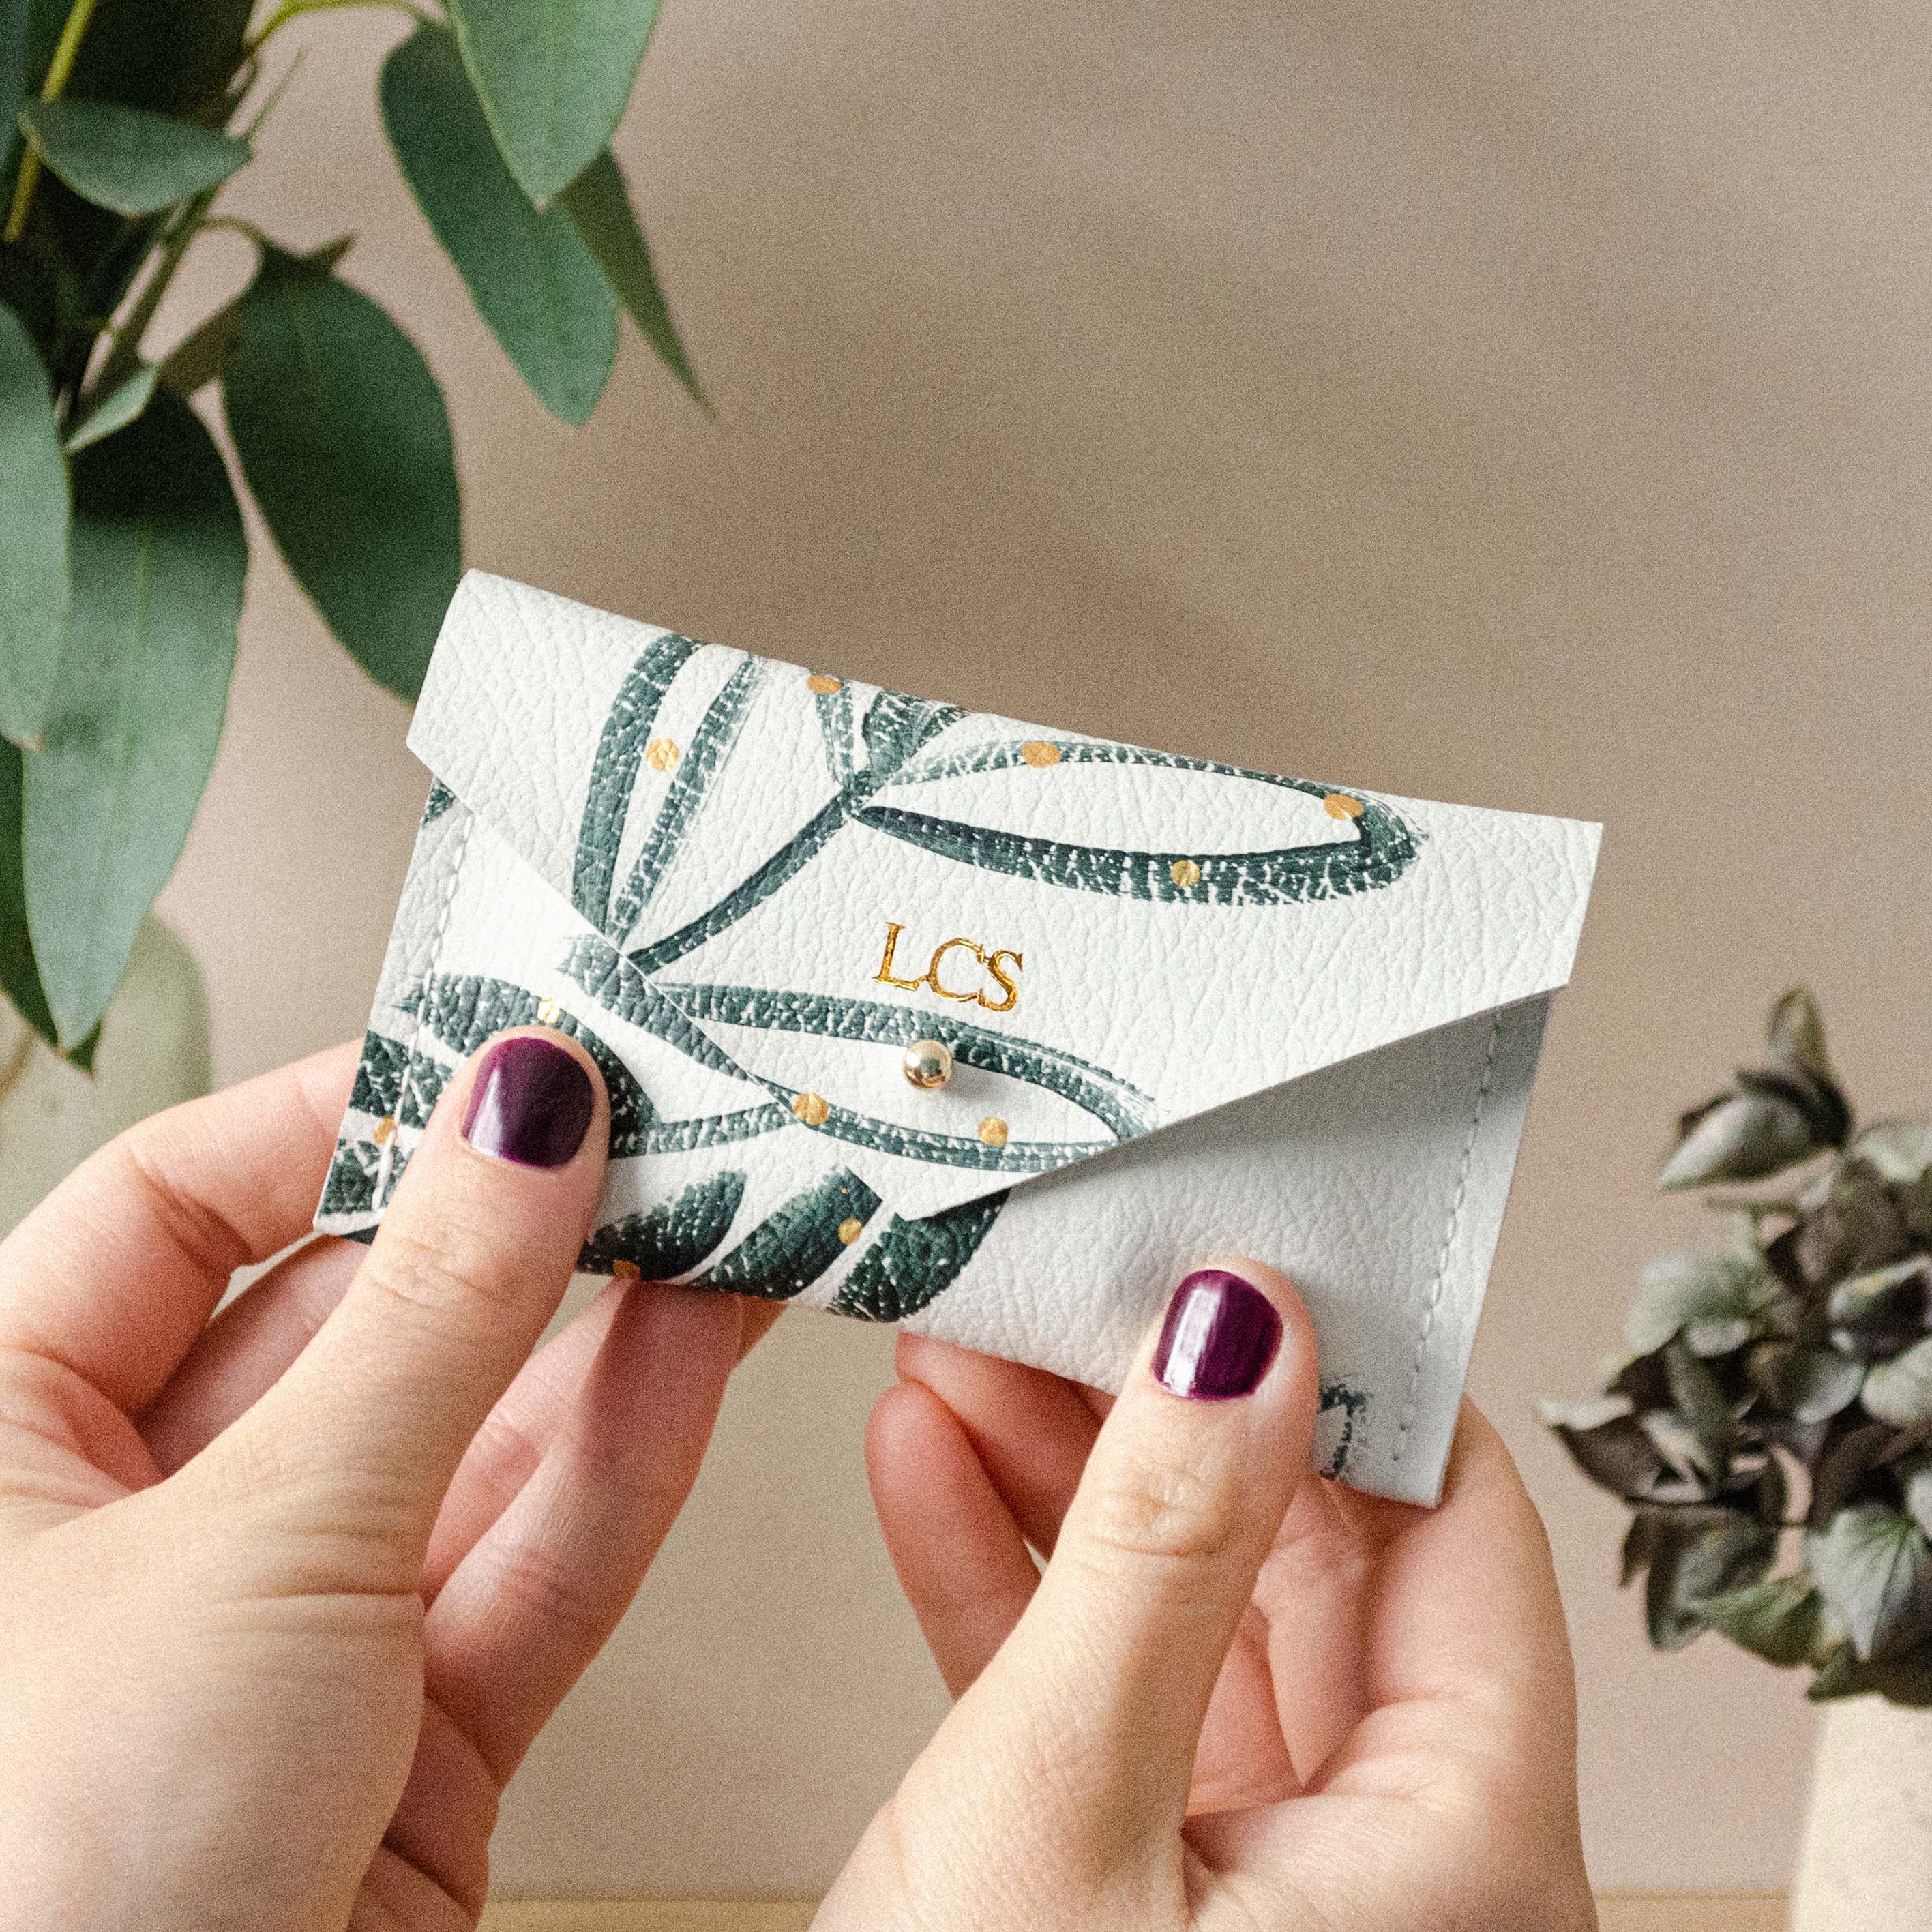 Botanical leather card holder with initials on it.